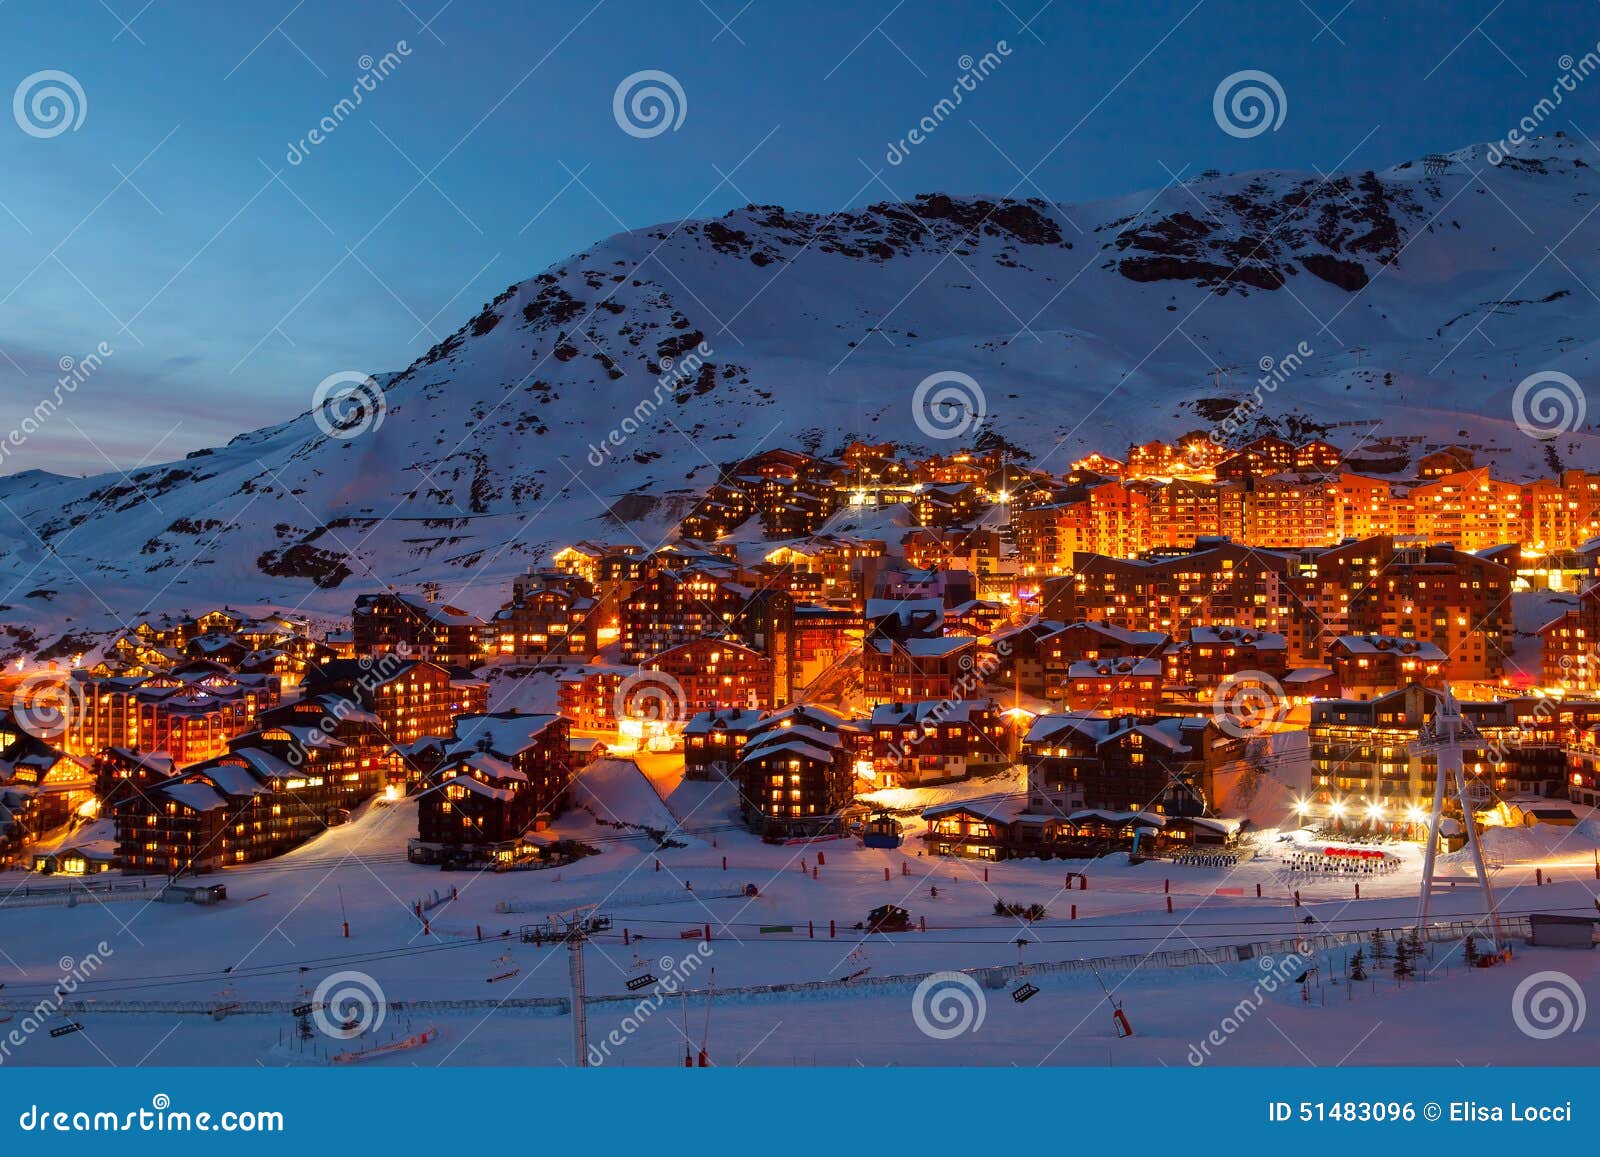 val thorens by night